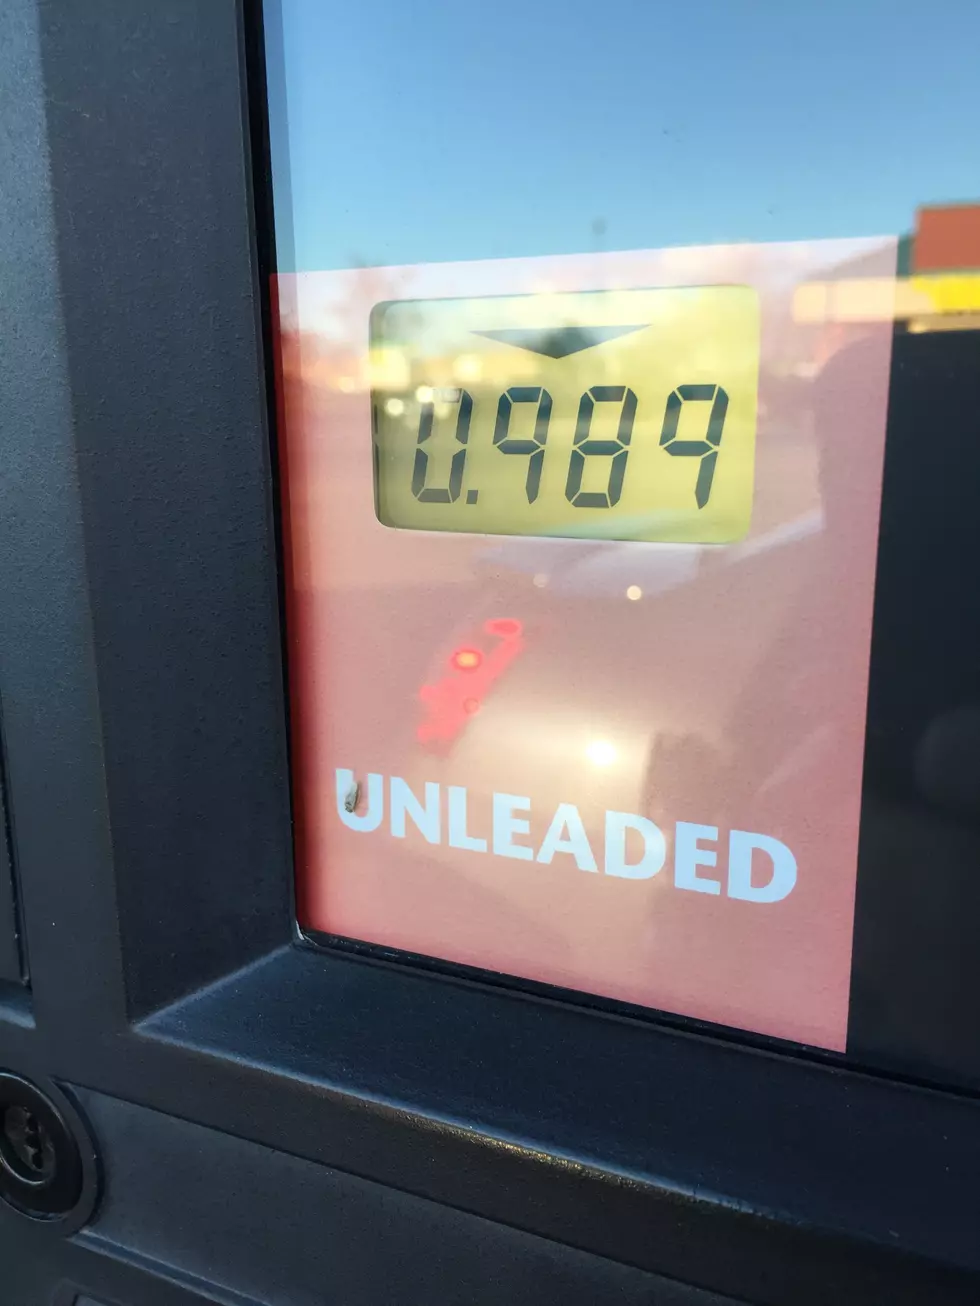 Cheapest Gas in Boise